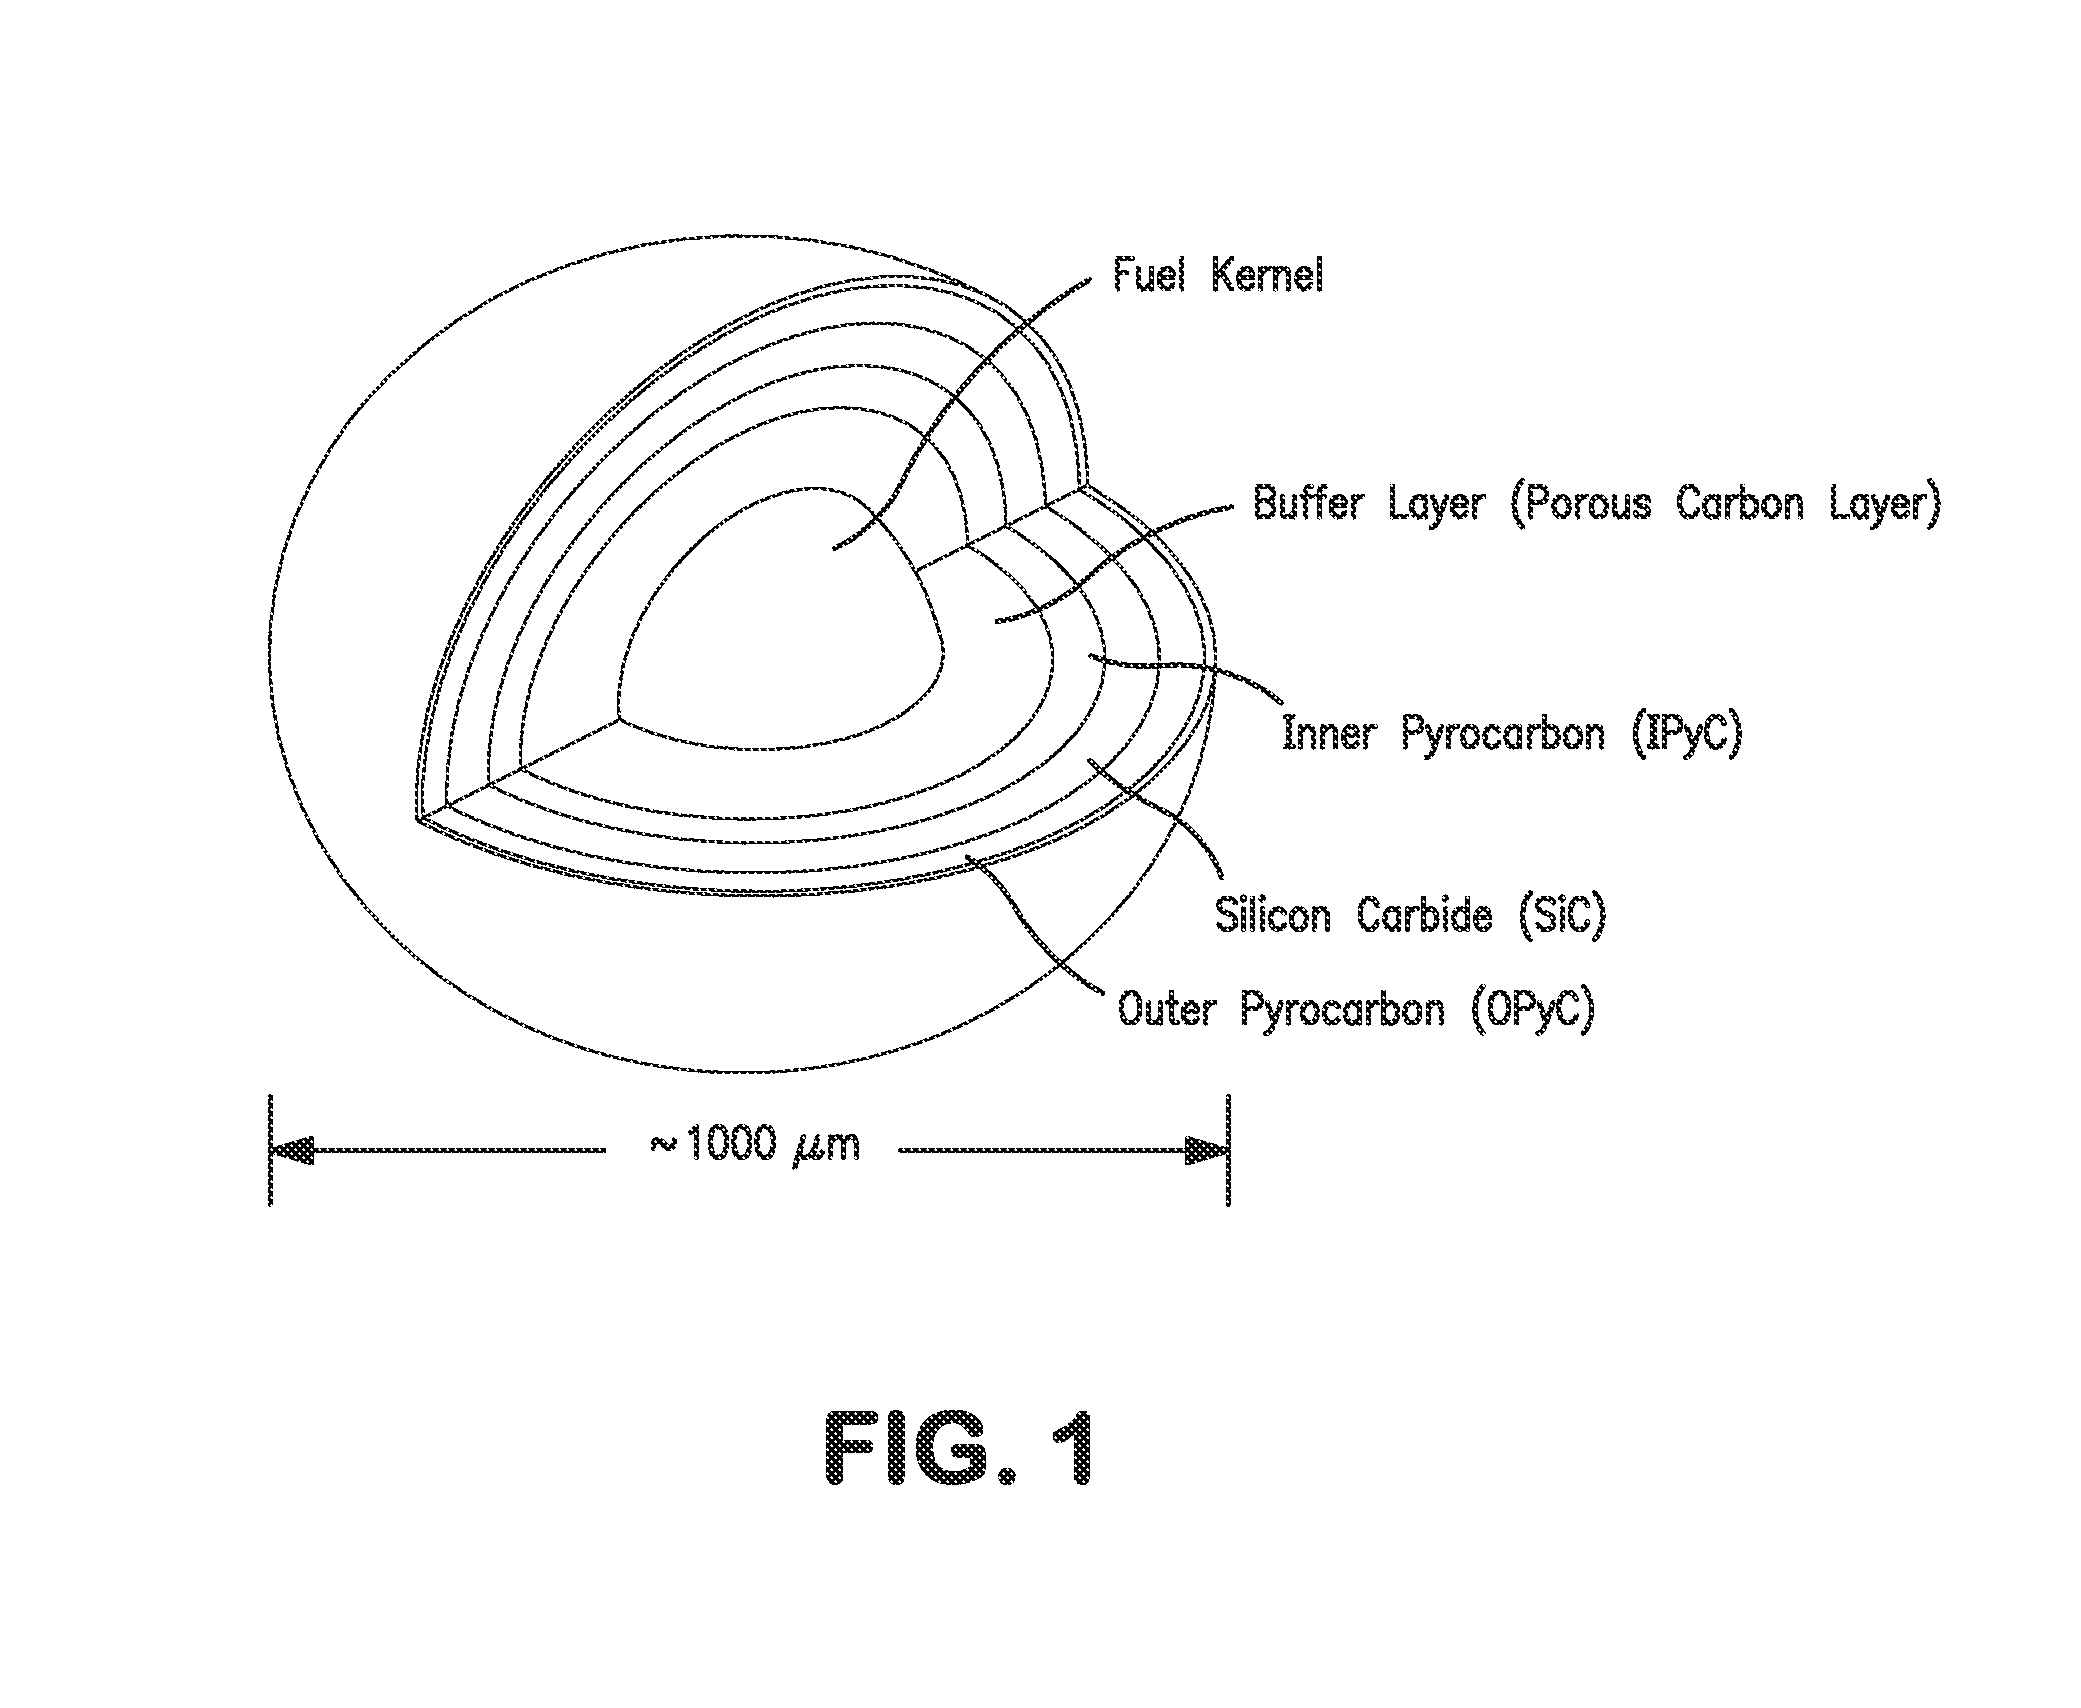 Processing fissile material mixtures containing zirconium and/or carbon